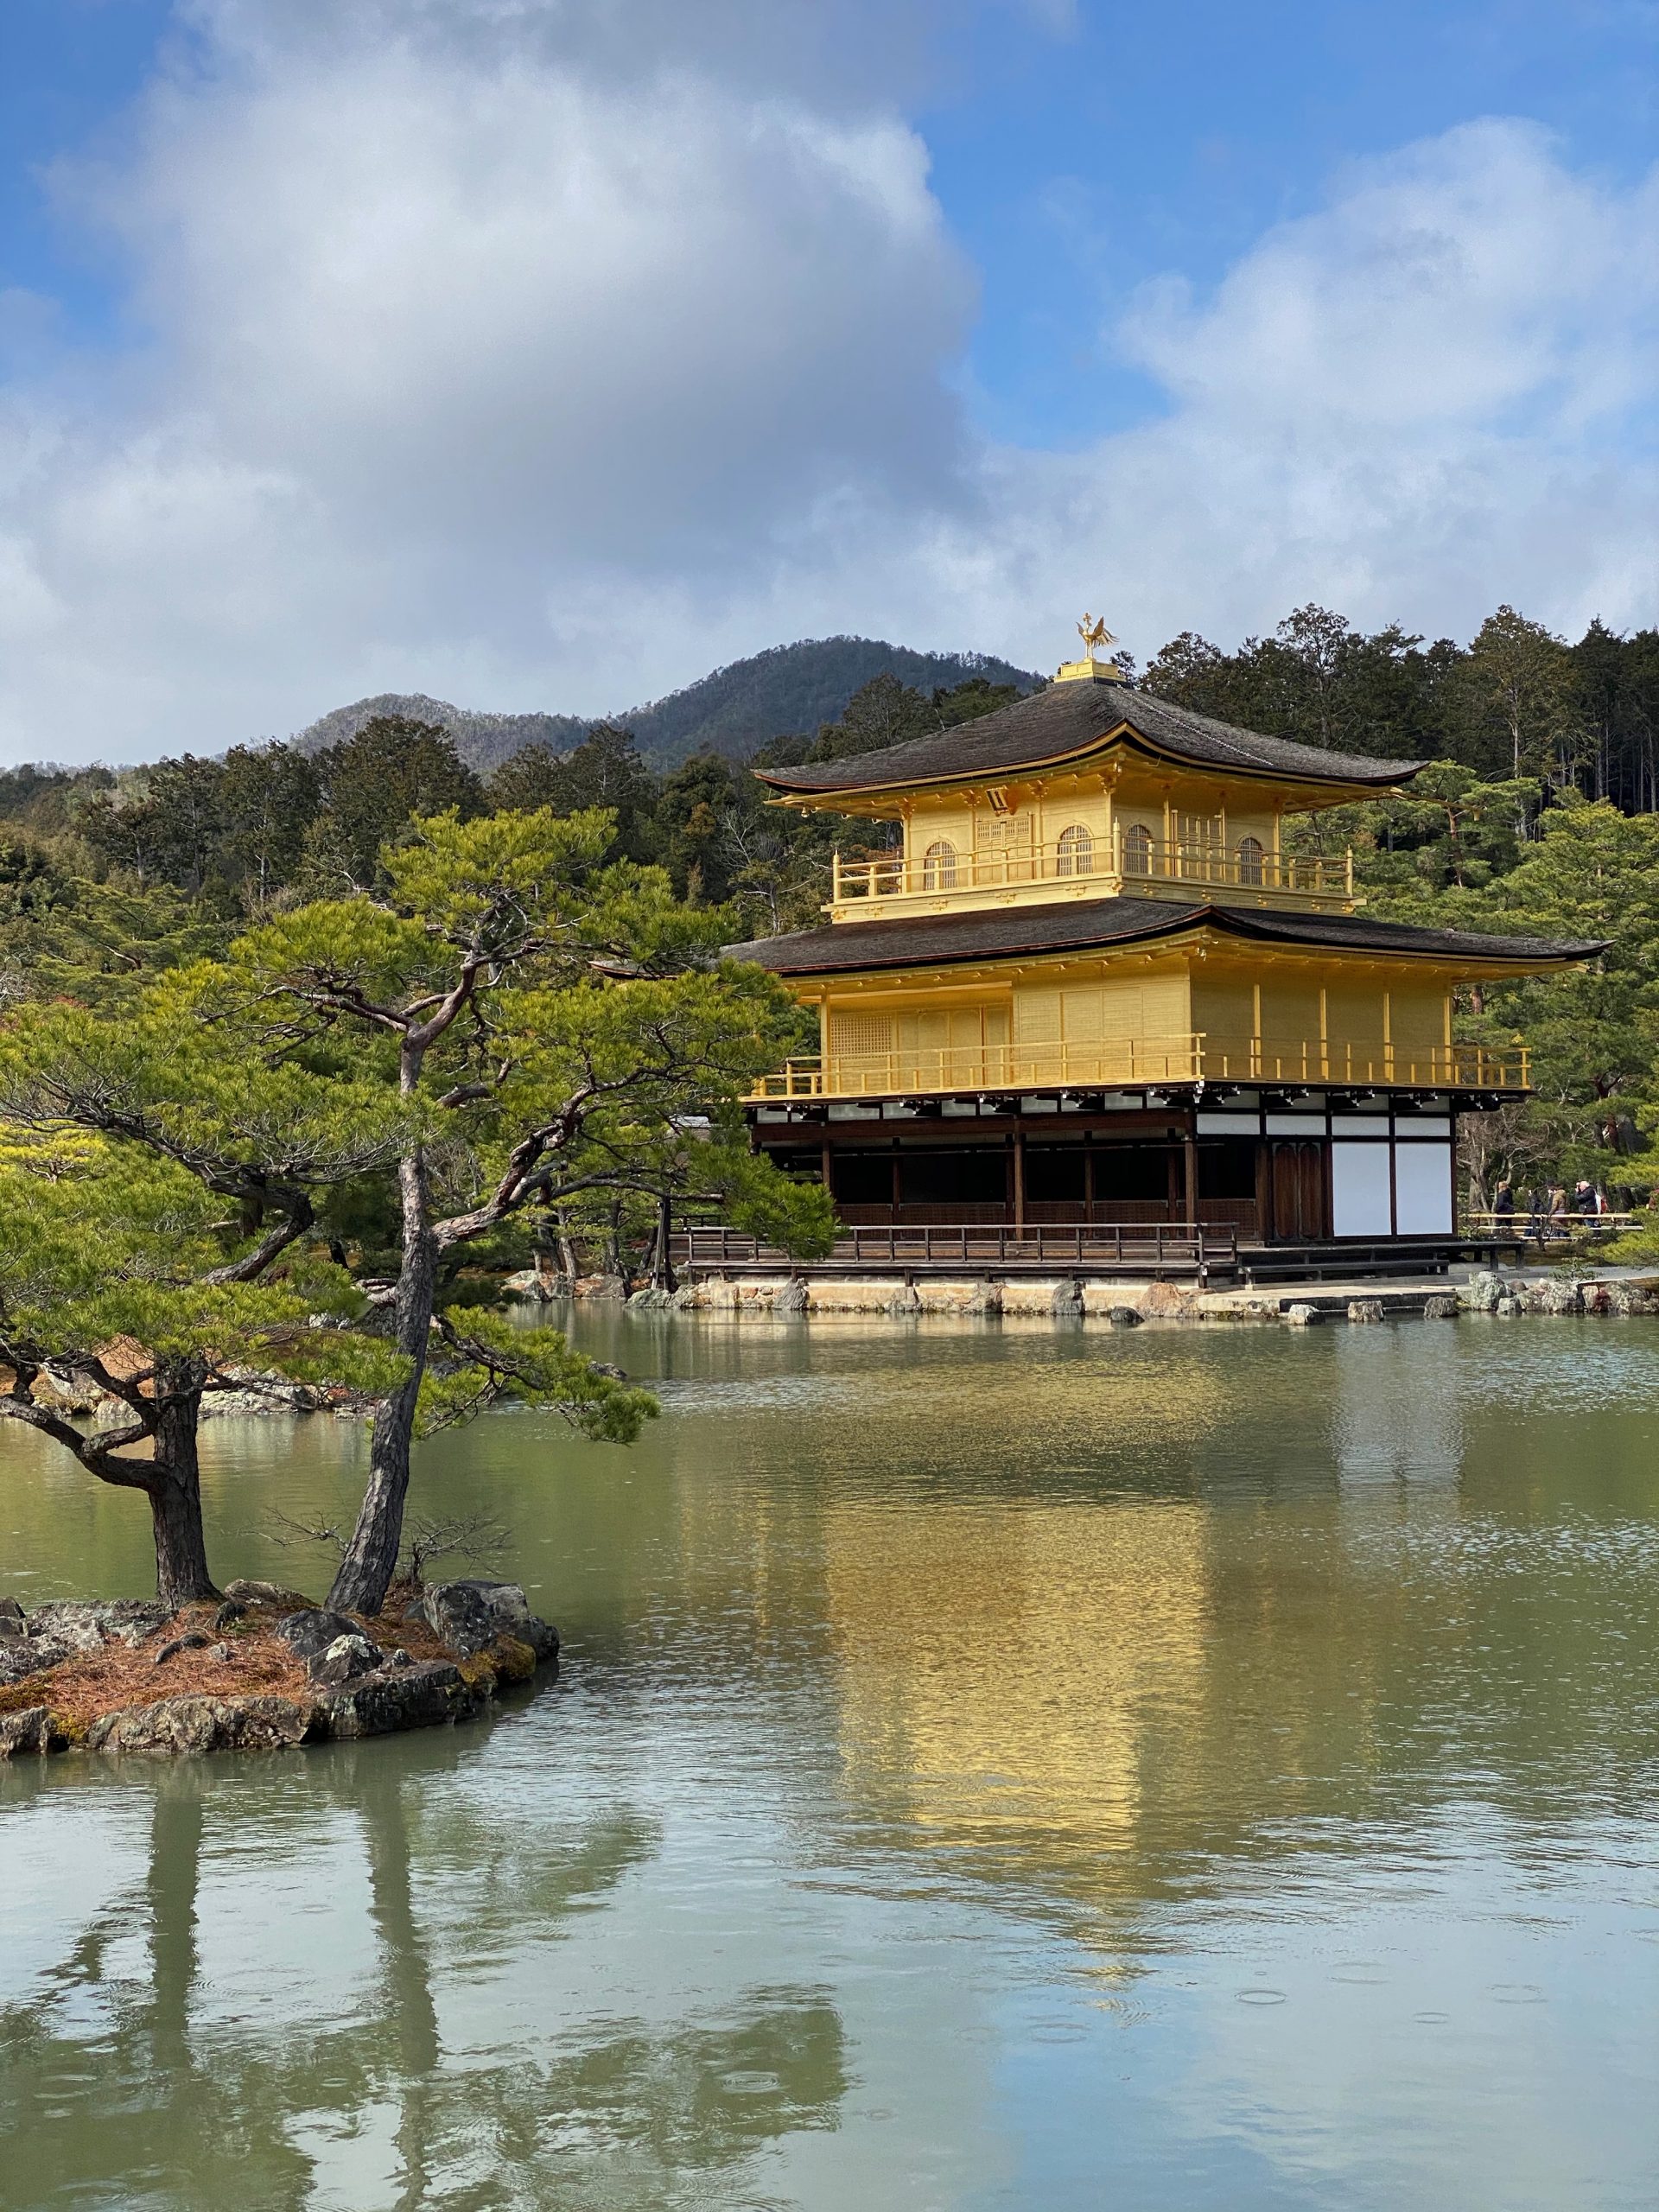 A golden temple with a nice lake in front and a tree on a mini island in the water